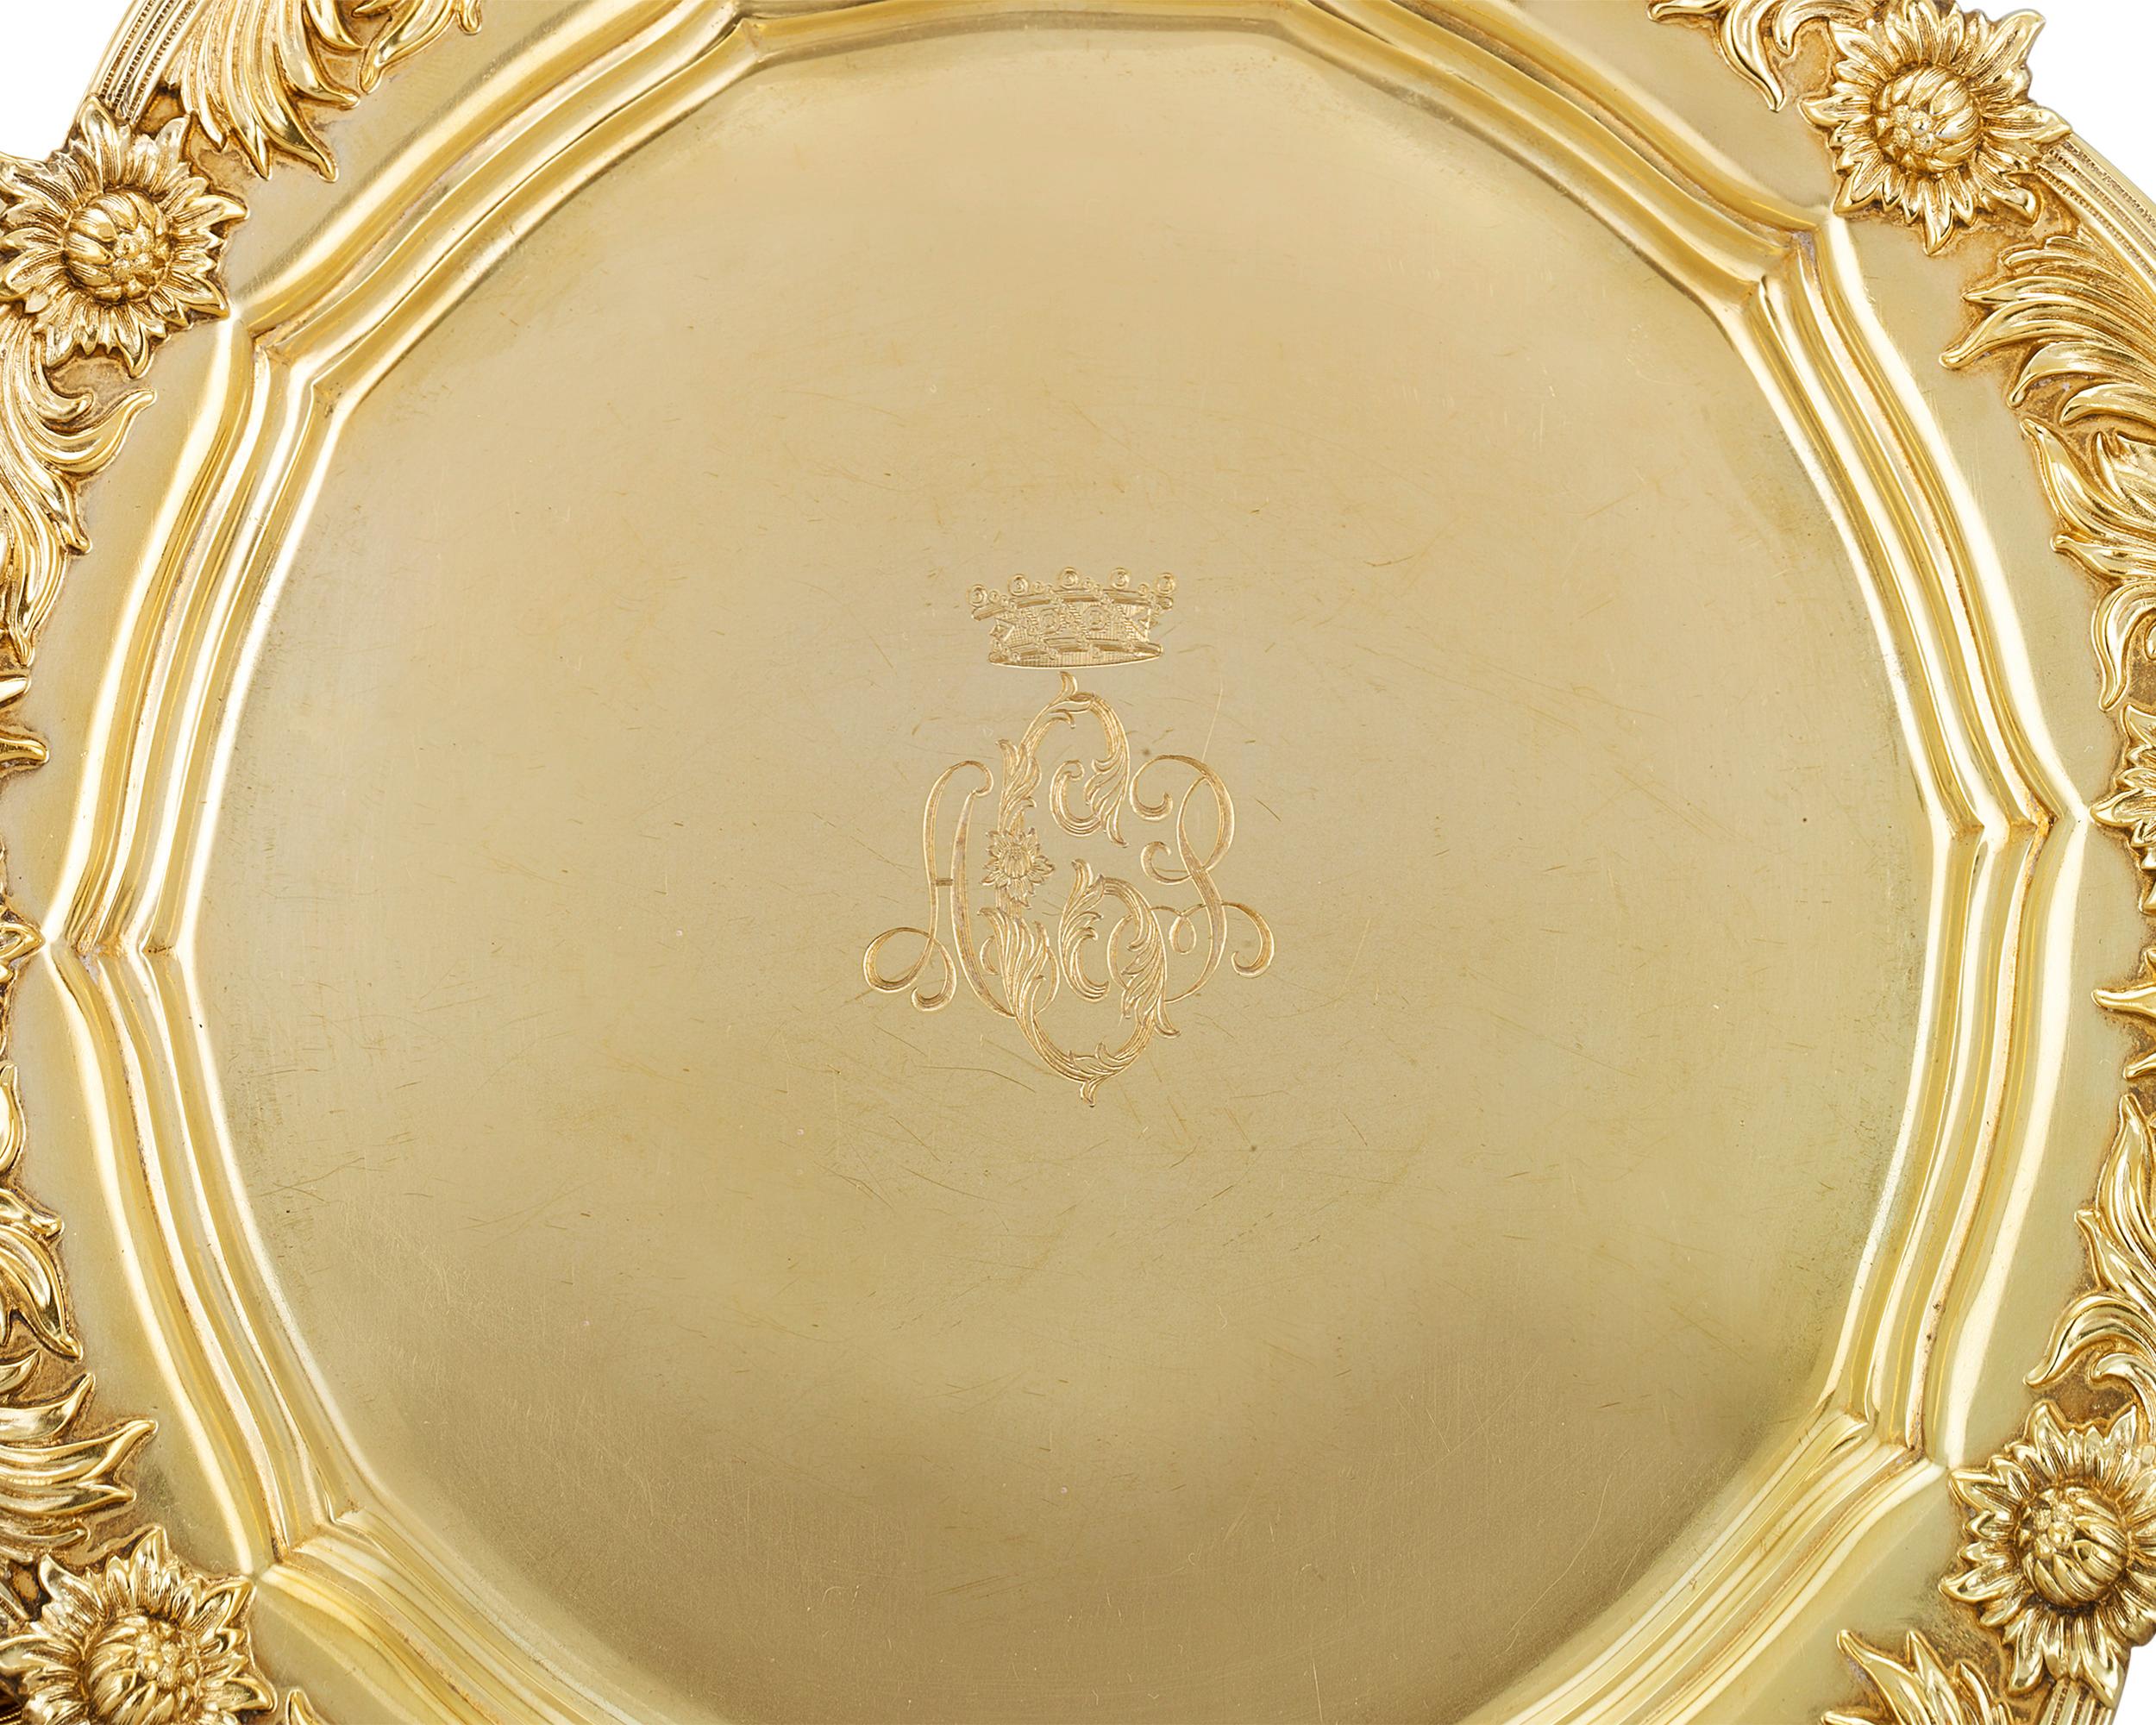 This exceptionally rare set of 8 silver gilt salad plates by Tiffany & Co. is crafted in the renowned firm’s Chrysanthemum pattern. Each plate is skillfully chased with blooms of chrysanthemum flowers, which encircle the plates' scalloped edges. The